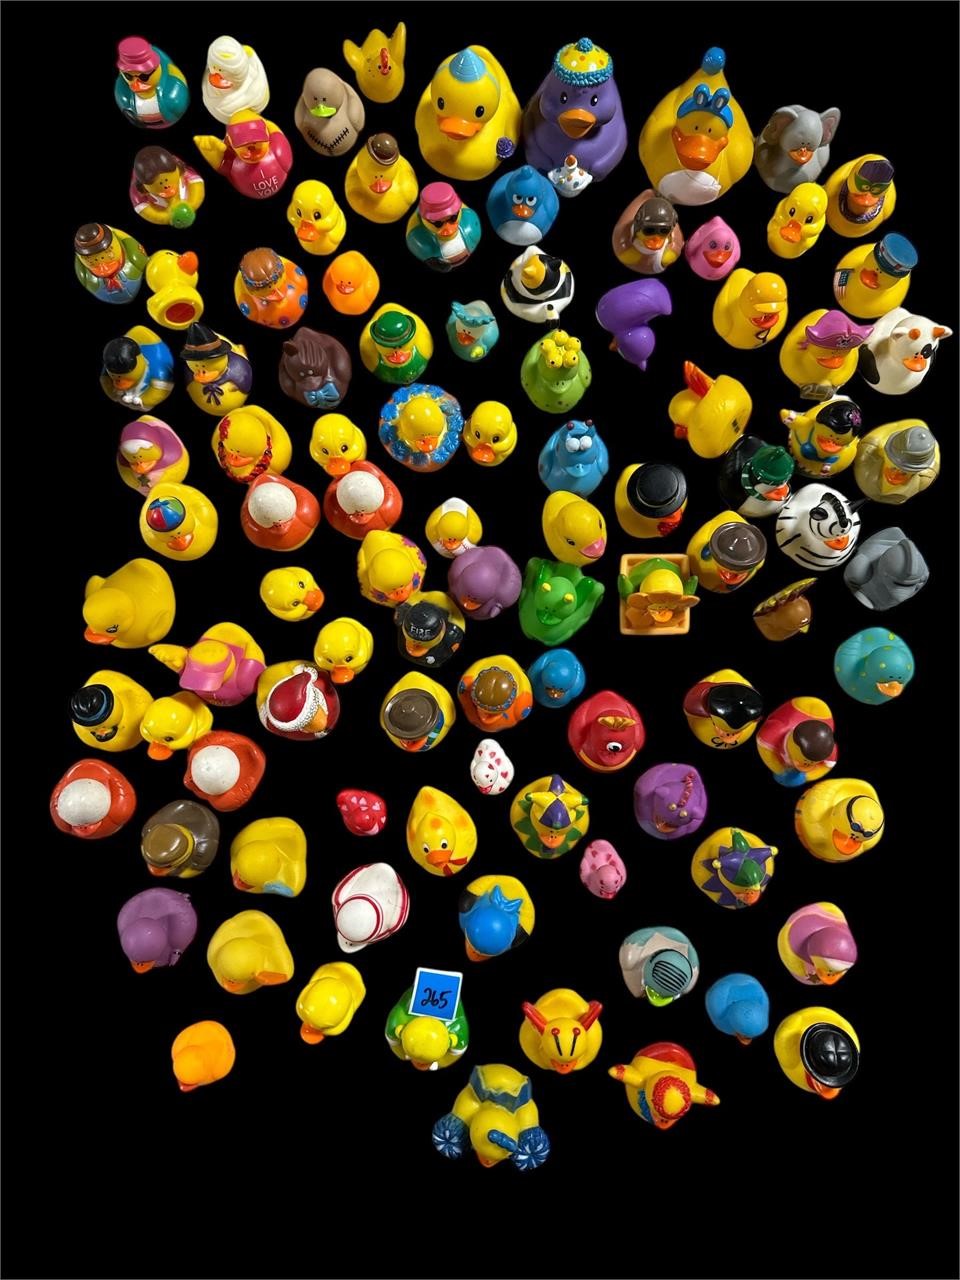 Every type of rubber duckies